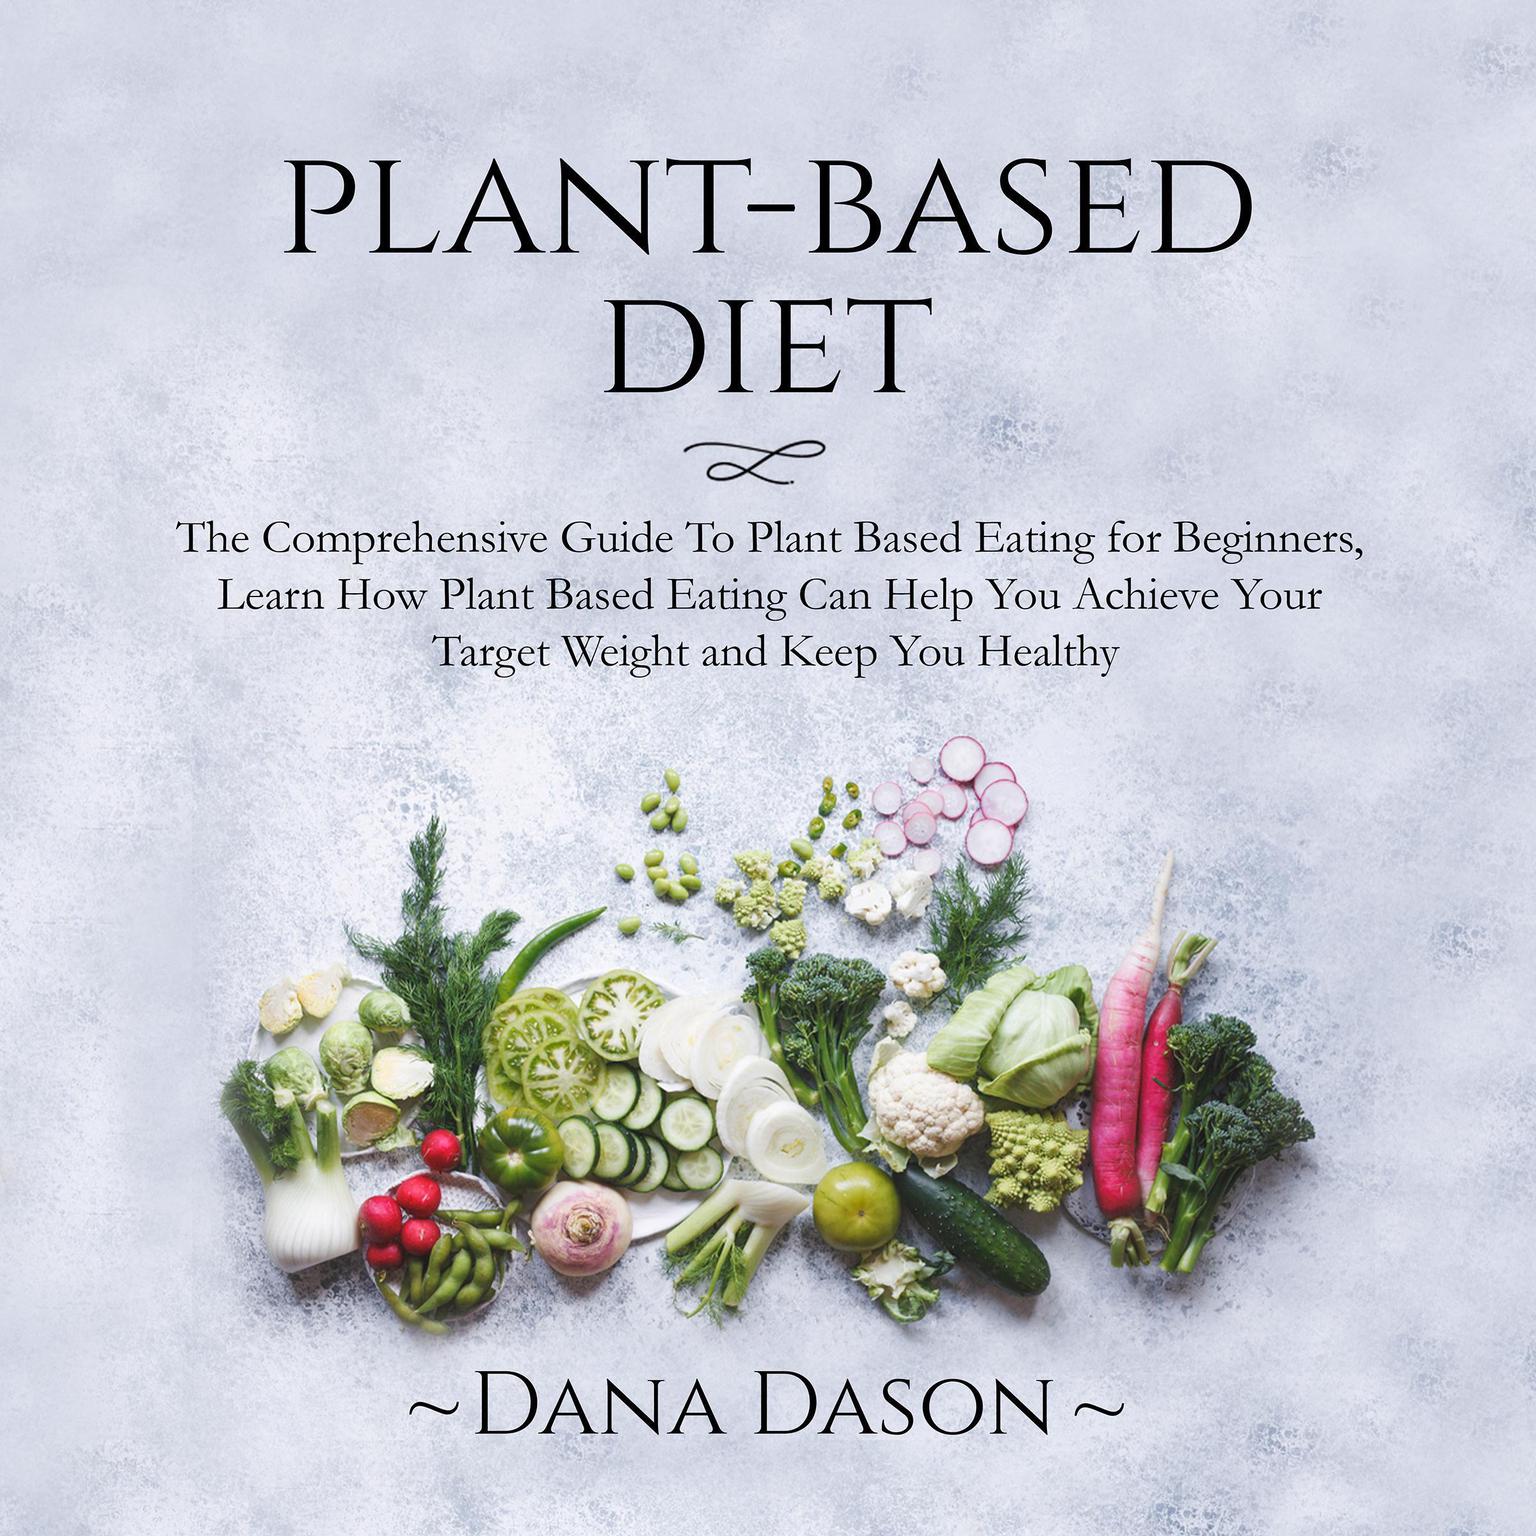 Plant Based Diet: The Comprehensive Guide To Plant Based Eating for Beginners, Learn How Plant Based Eating Can Help You Achieve Your Target Weight and Keep You Healthy Audiobook, by Dana Dason